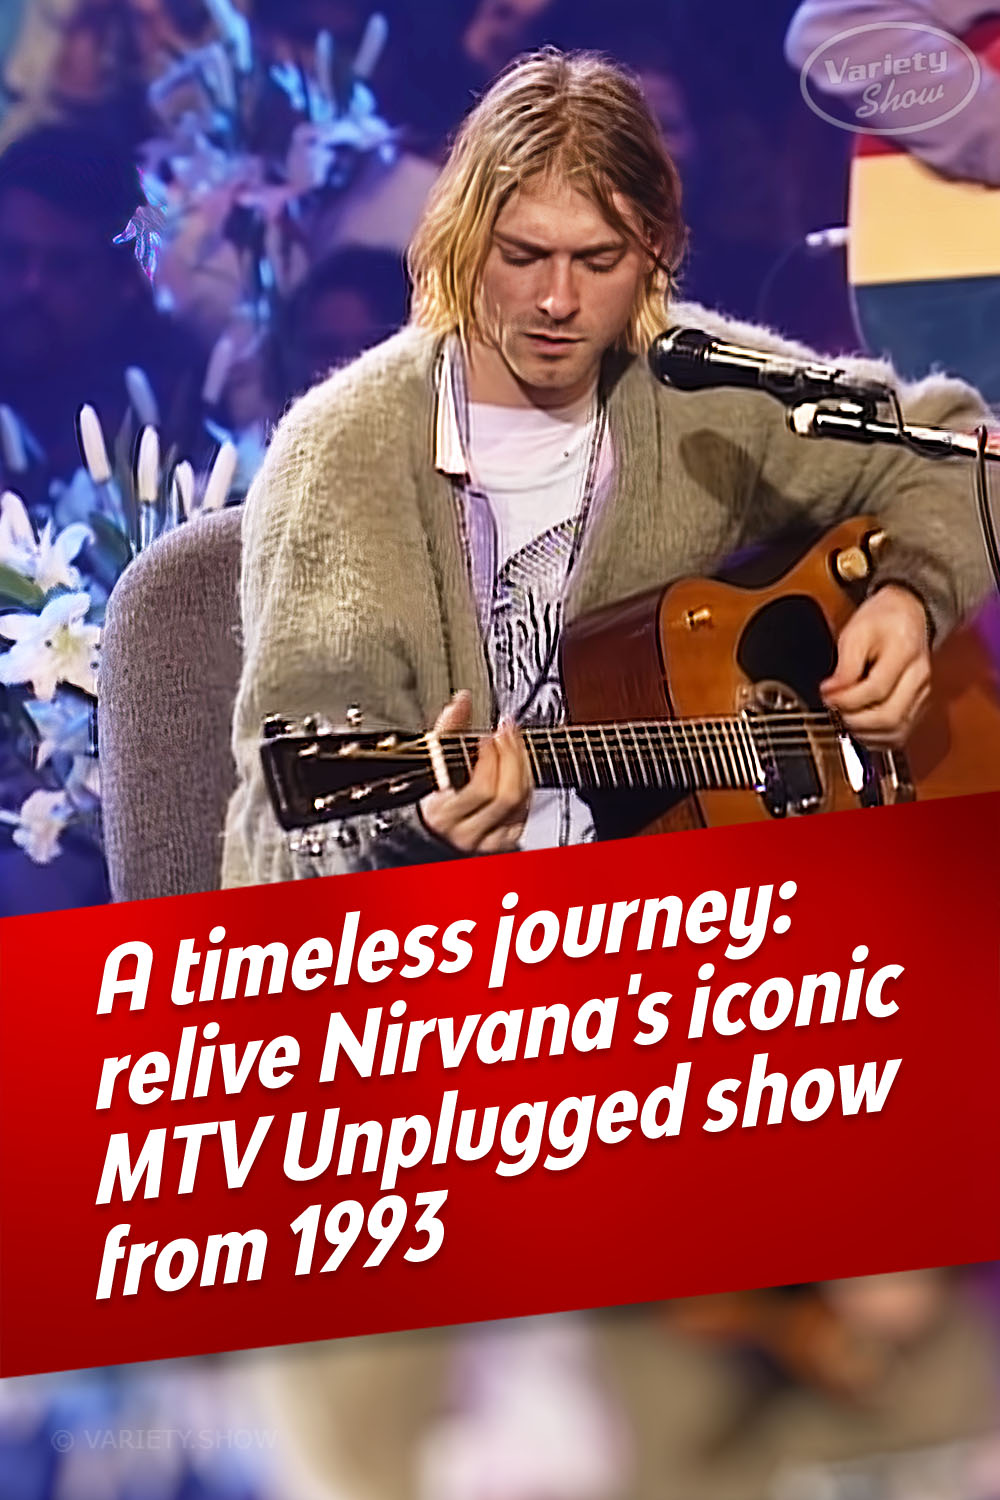 A timeless journey: relive Nirvana\'s iconic MTV Unplugged show from 1993